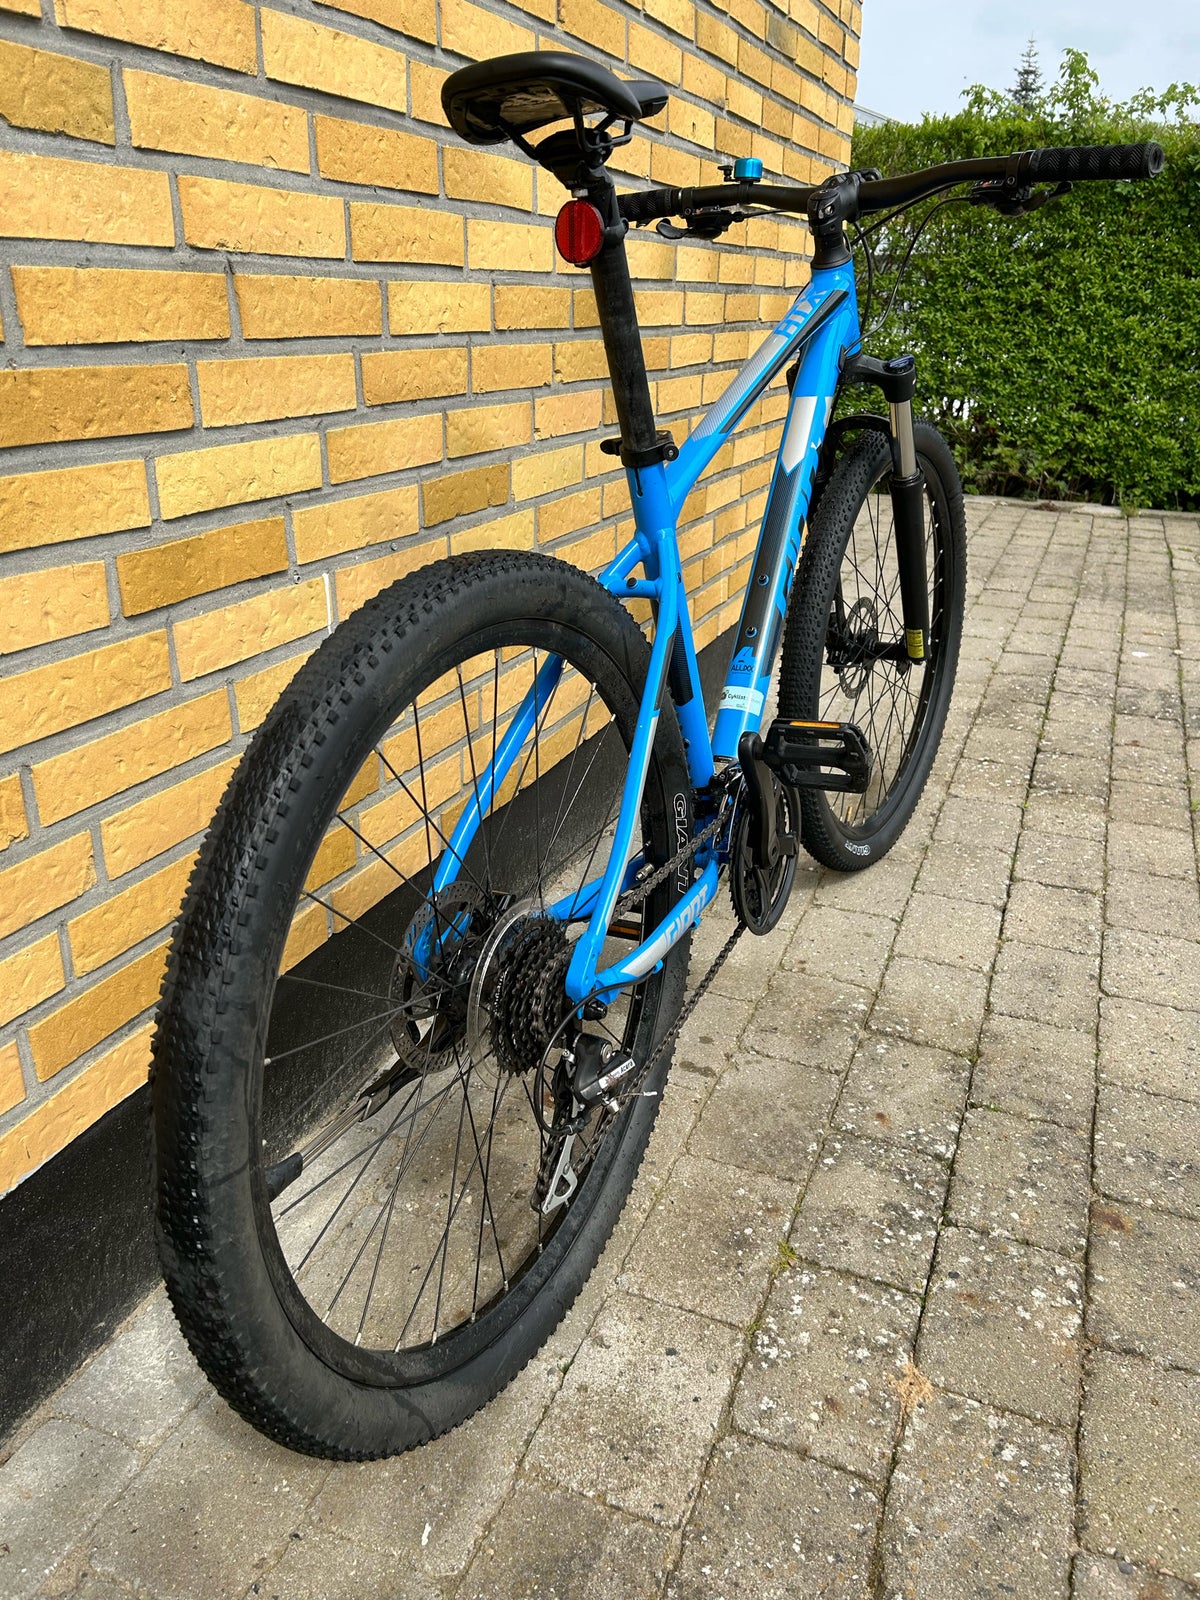 Giant Aluxx Atx, hardtail, M tommer